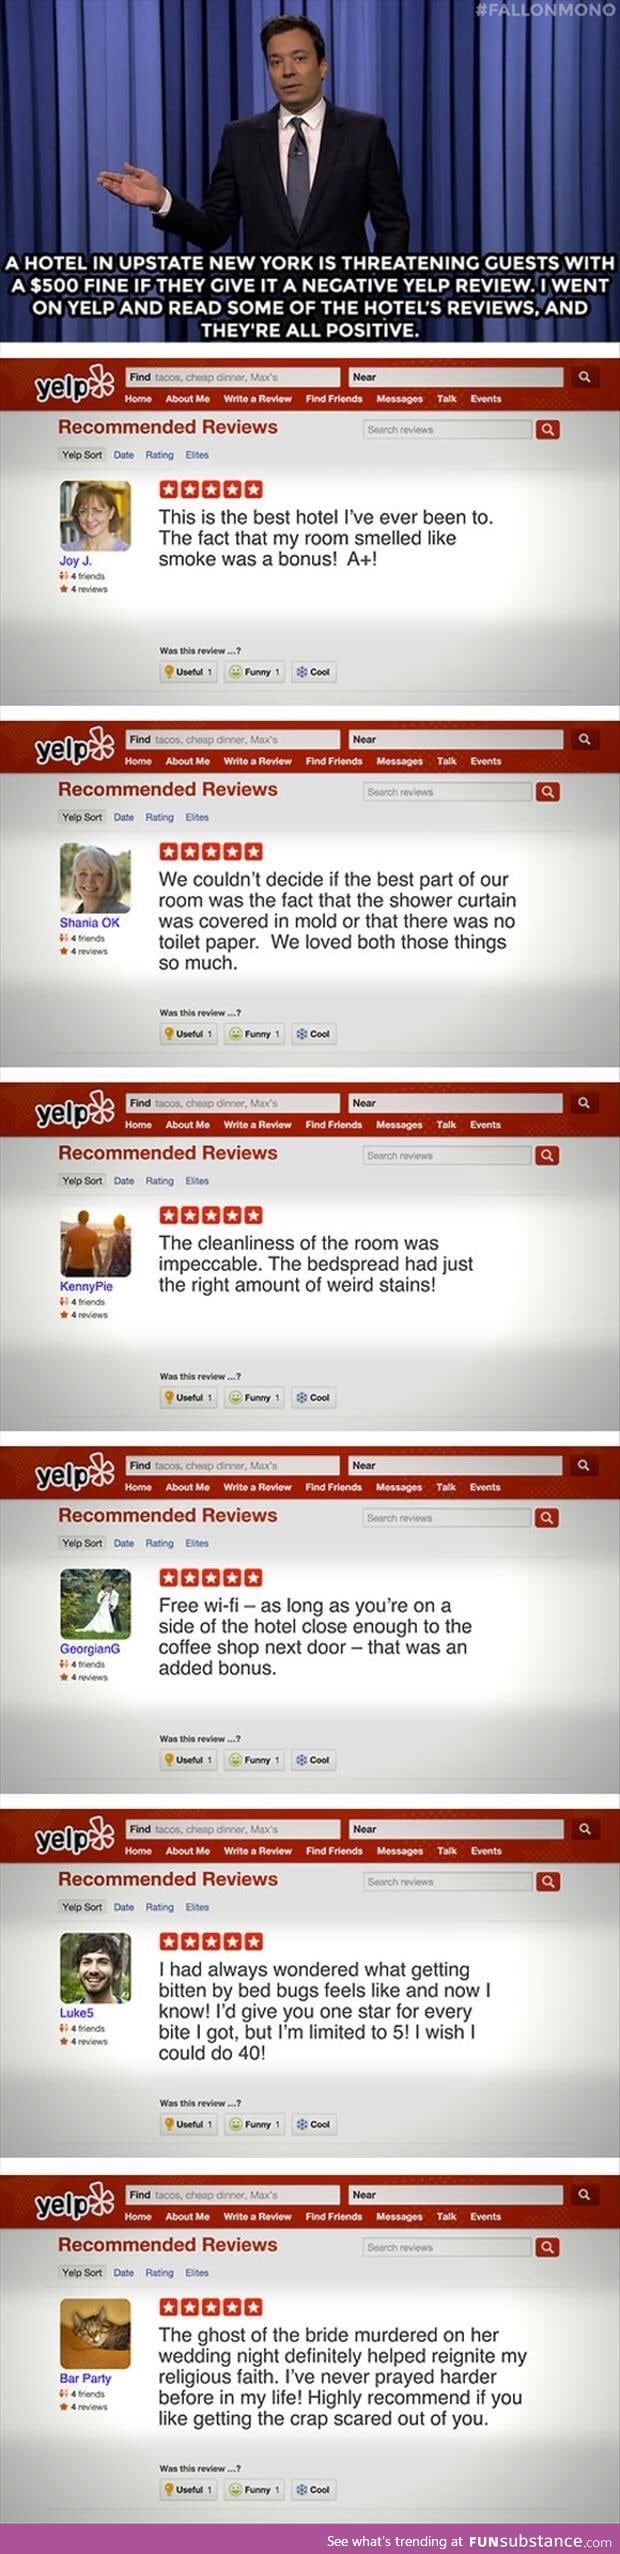 Positive reviews are totally positive...